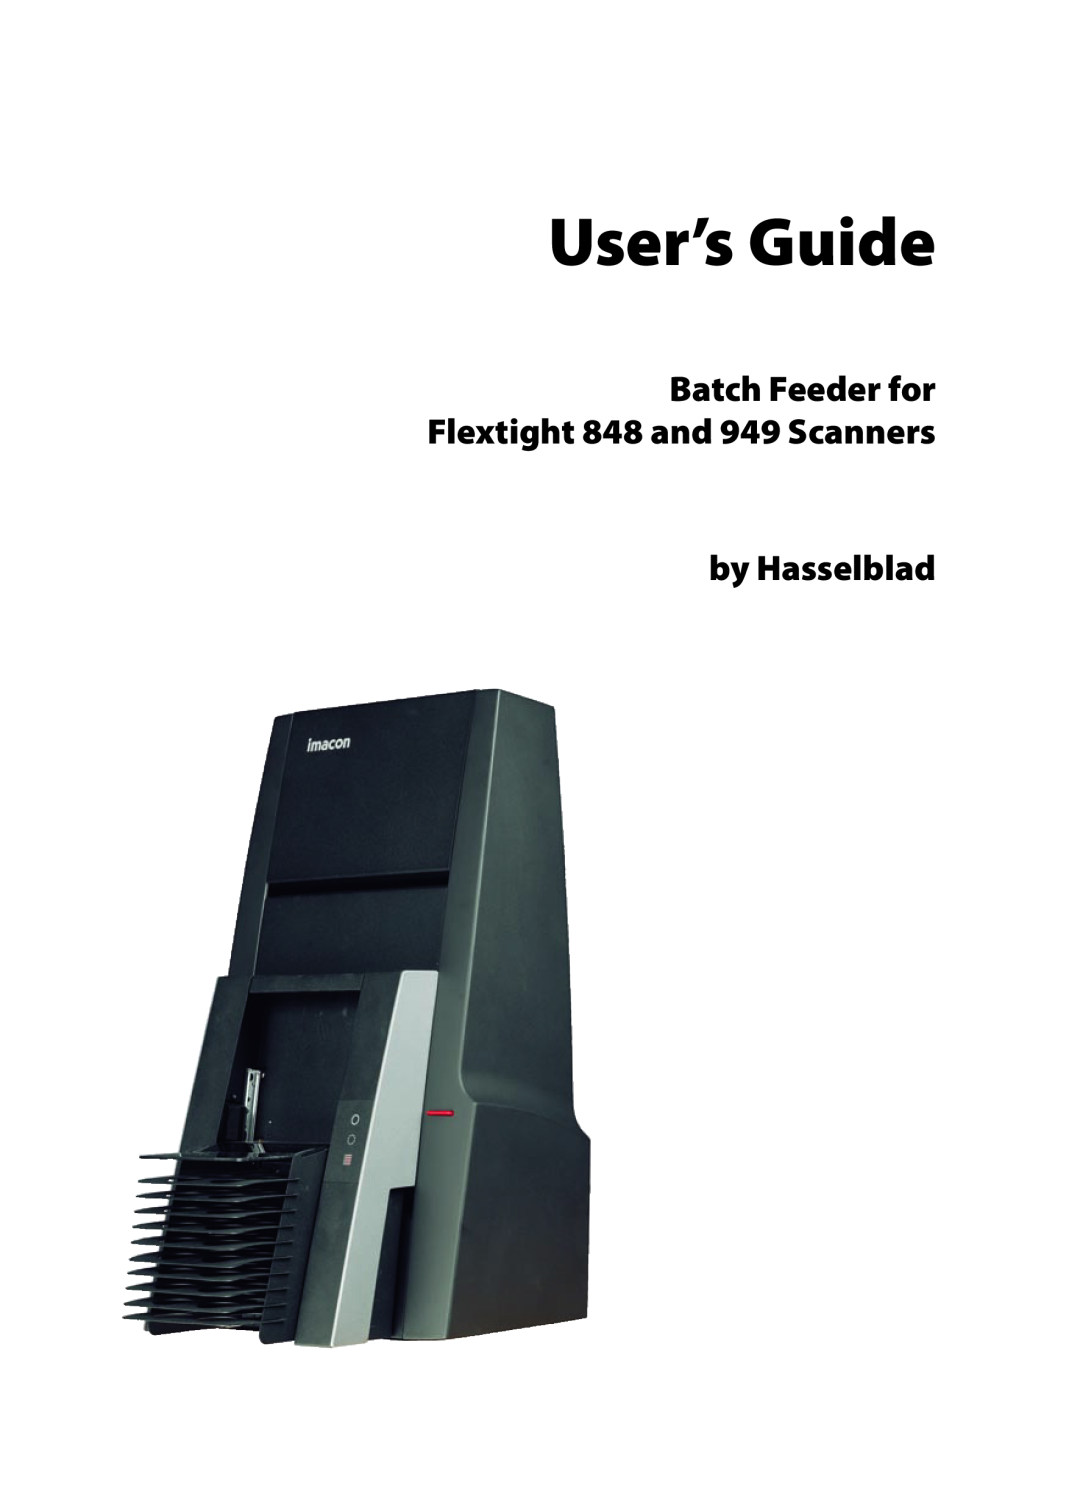 Hasselblad manual by Hasselblad, User’s Guide, Batch Feeder for Flextight 848 and 949 Scanners 